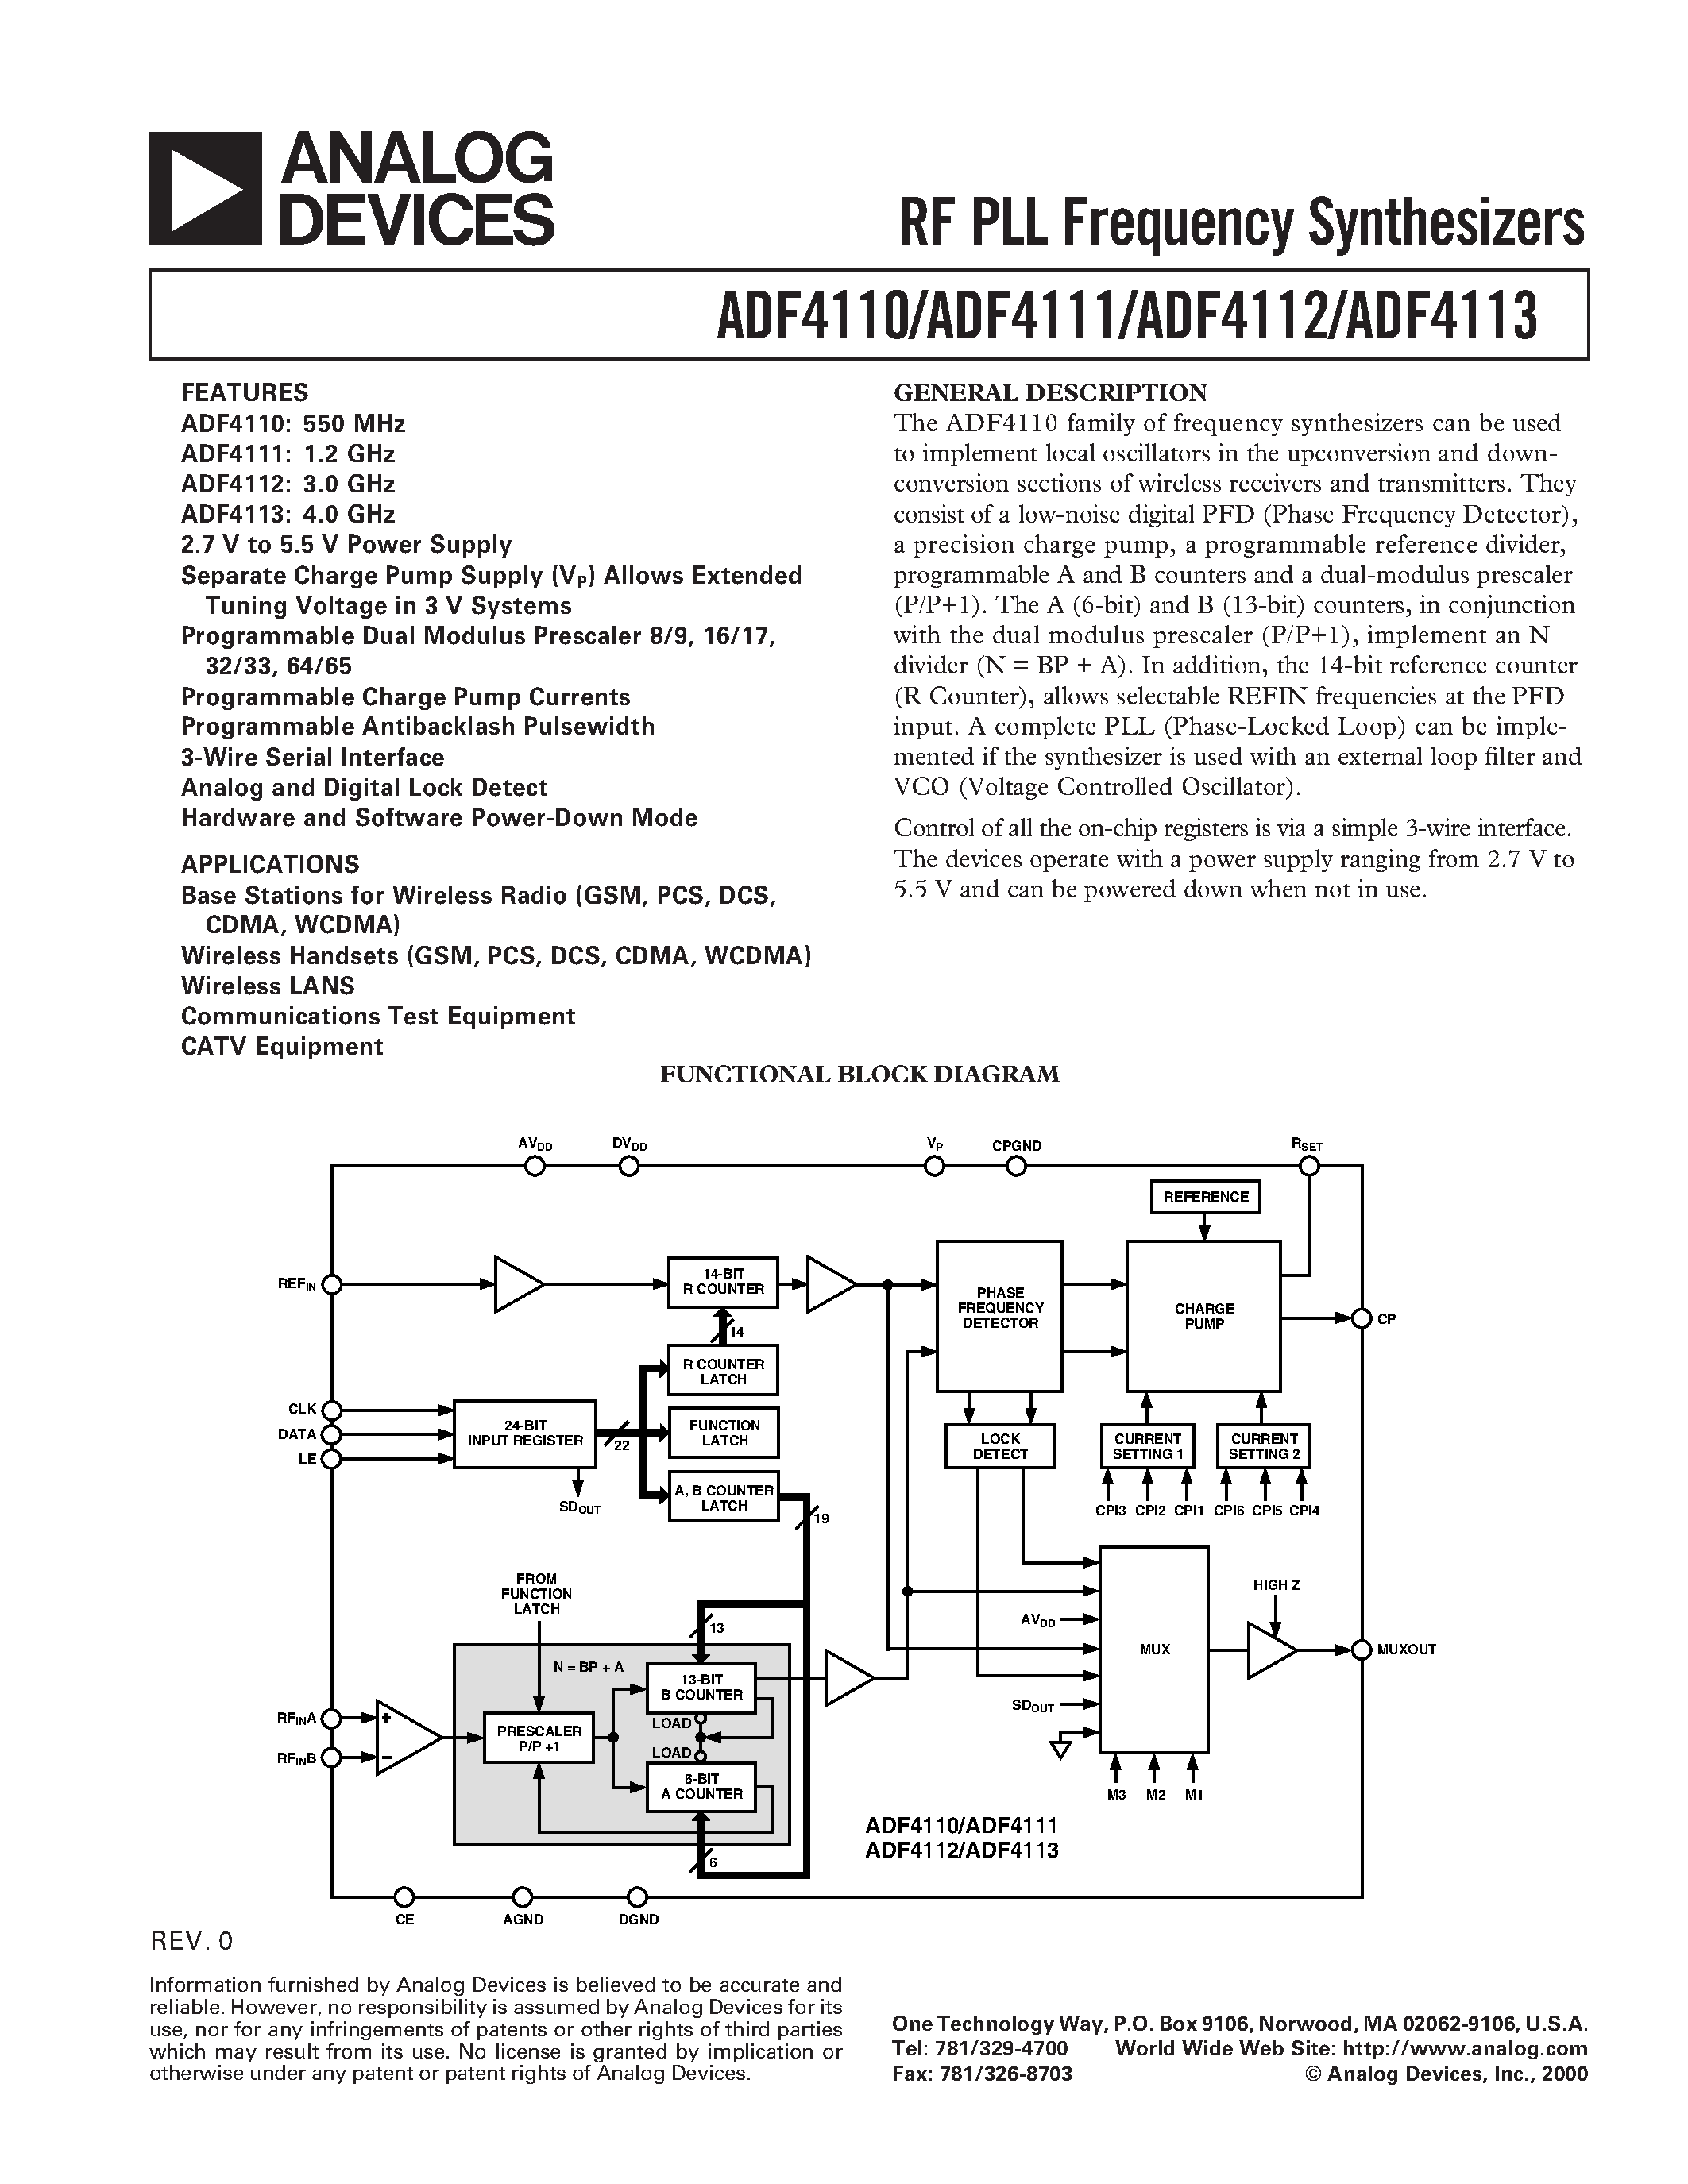 Даташит ADF4111BRU - RF PLL Frequency Synthesizers страница 1